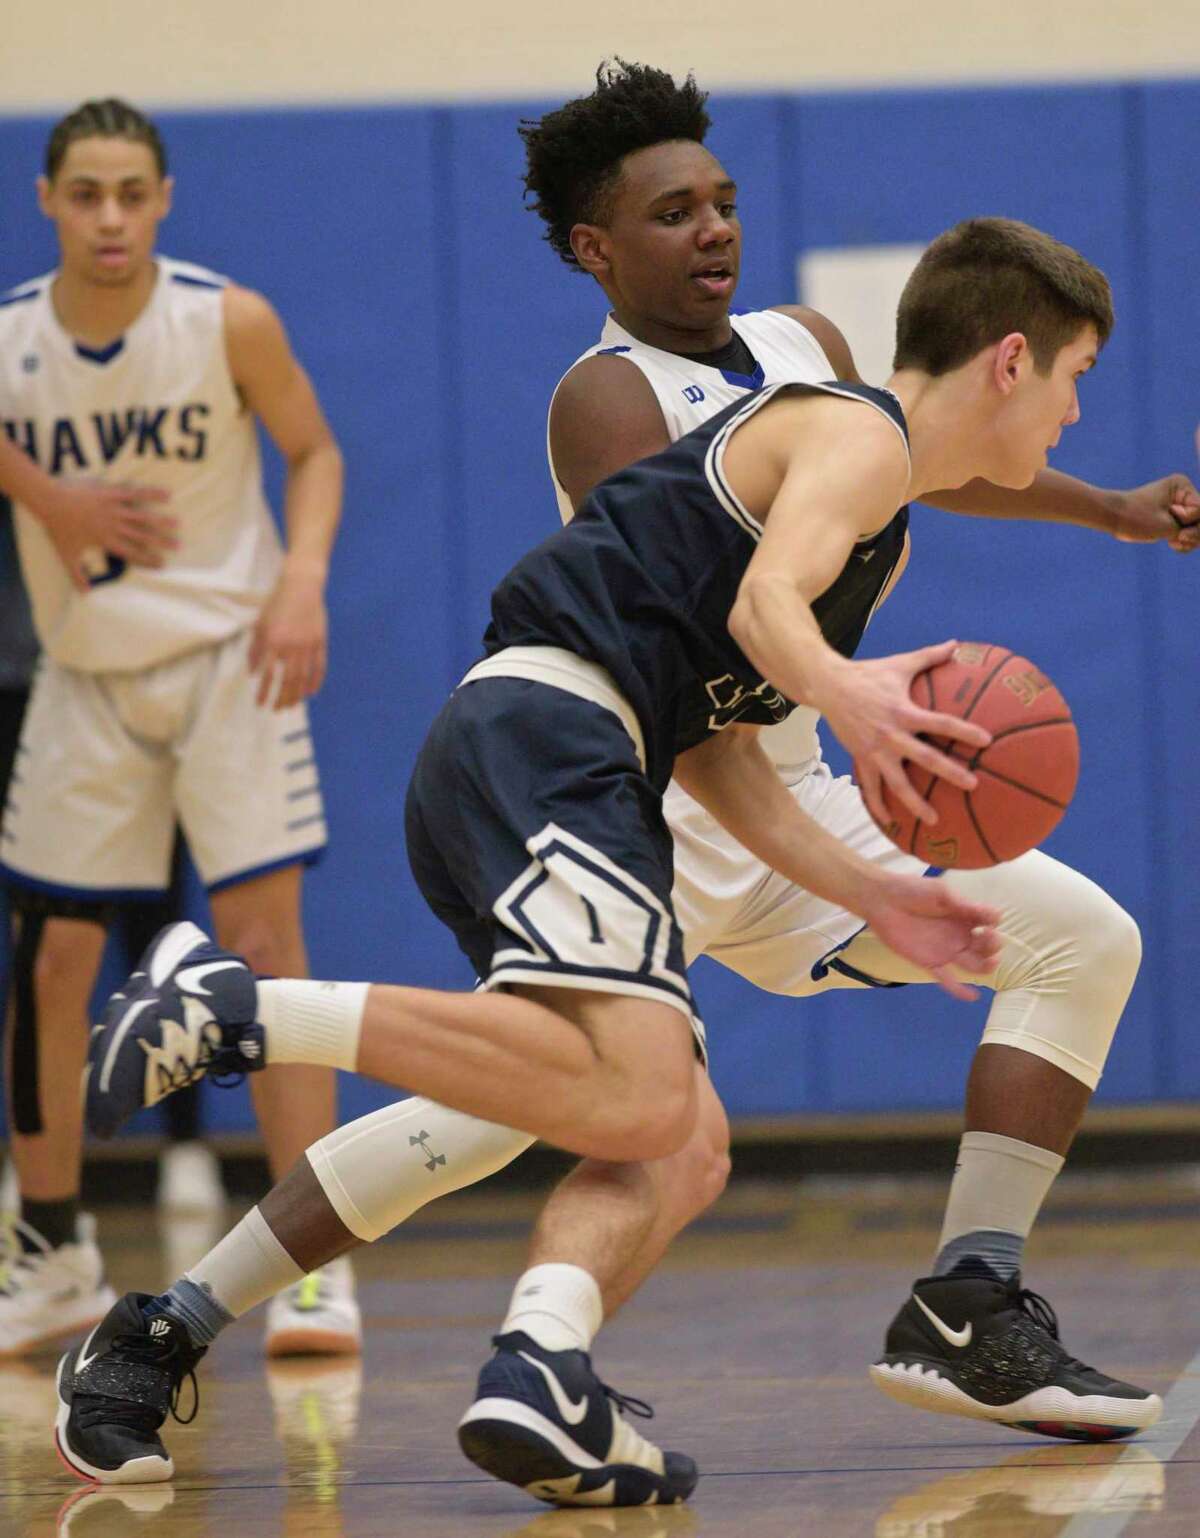 Immaculate’s Michael Iannetta, foreground, drives on Newtown’s Tyson Mobley during a game earlier this season.